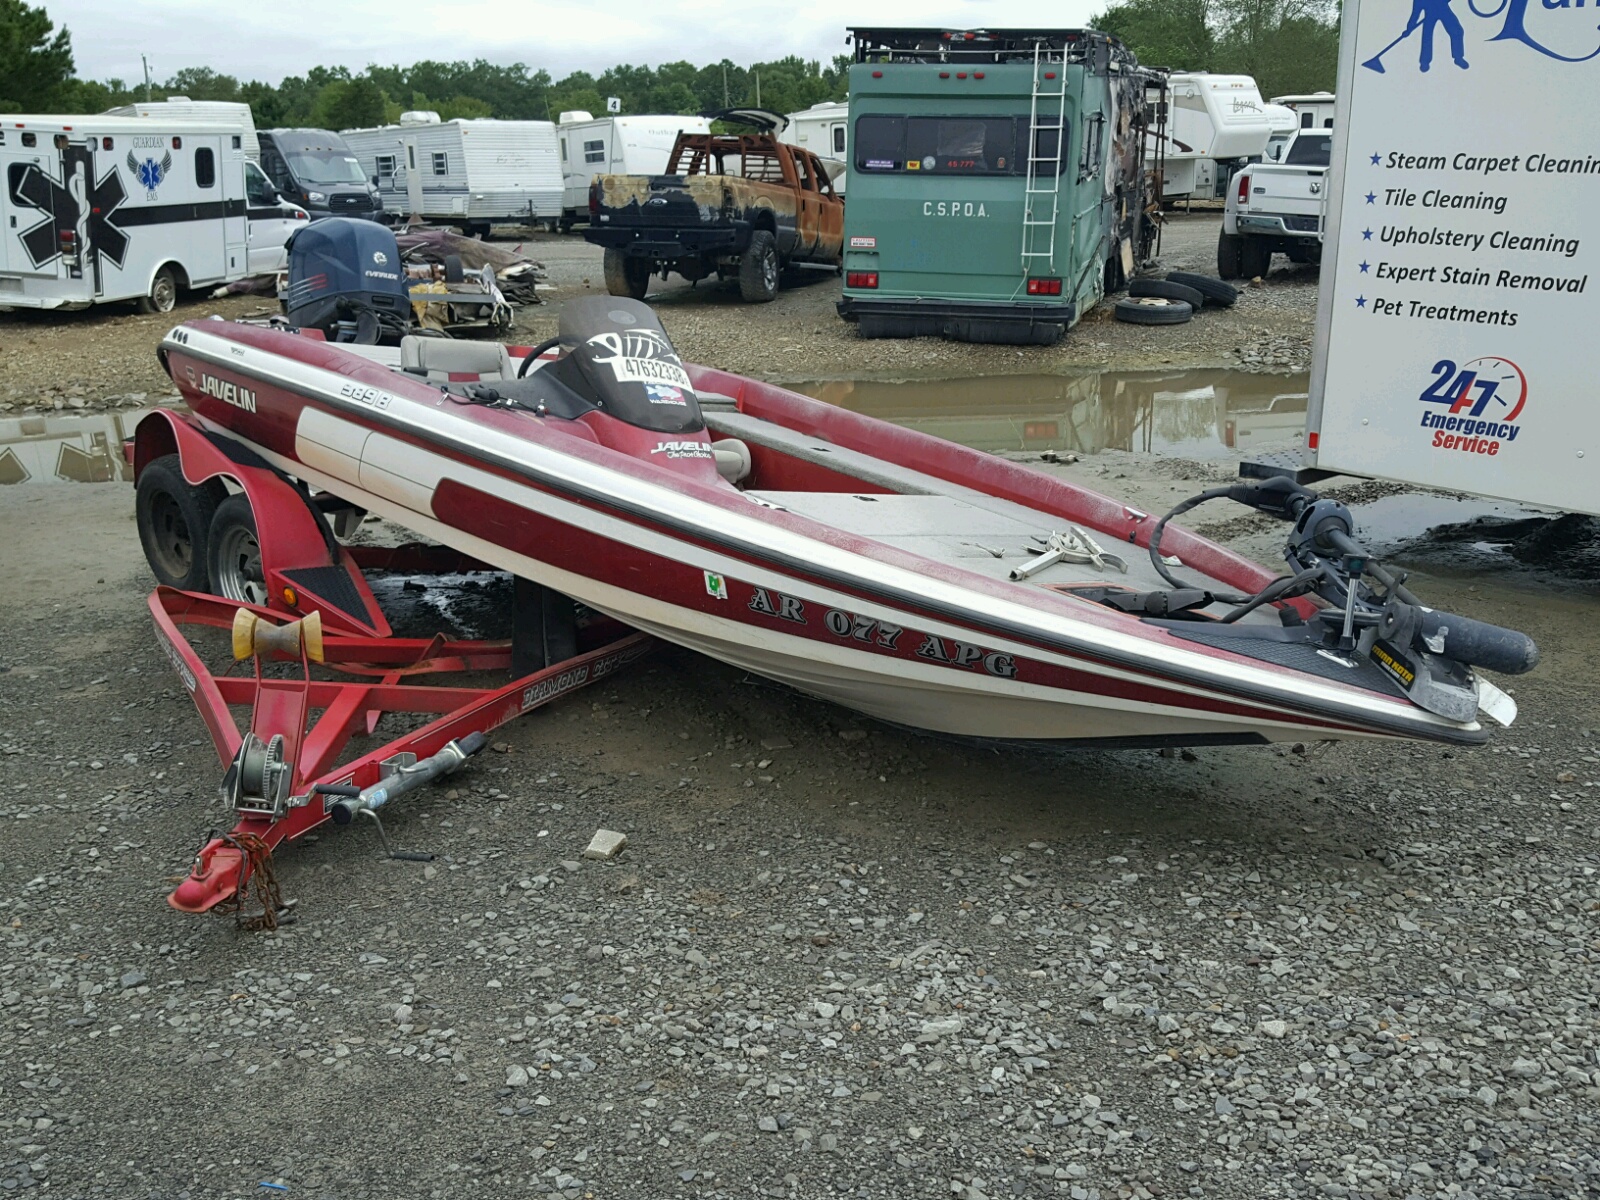 Salvage 1998 Javelin BOAT for sale.